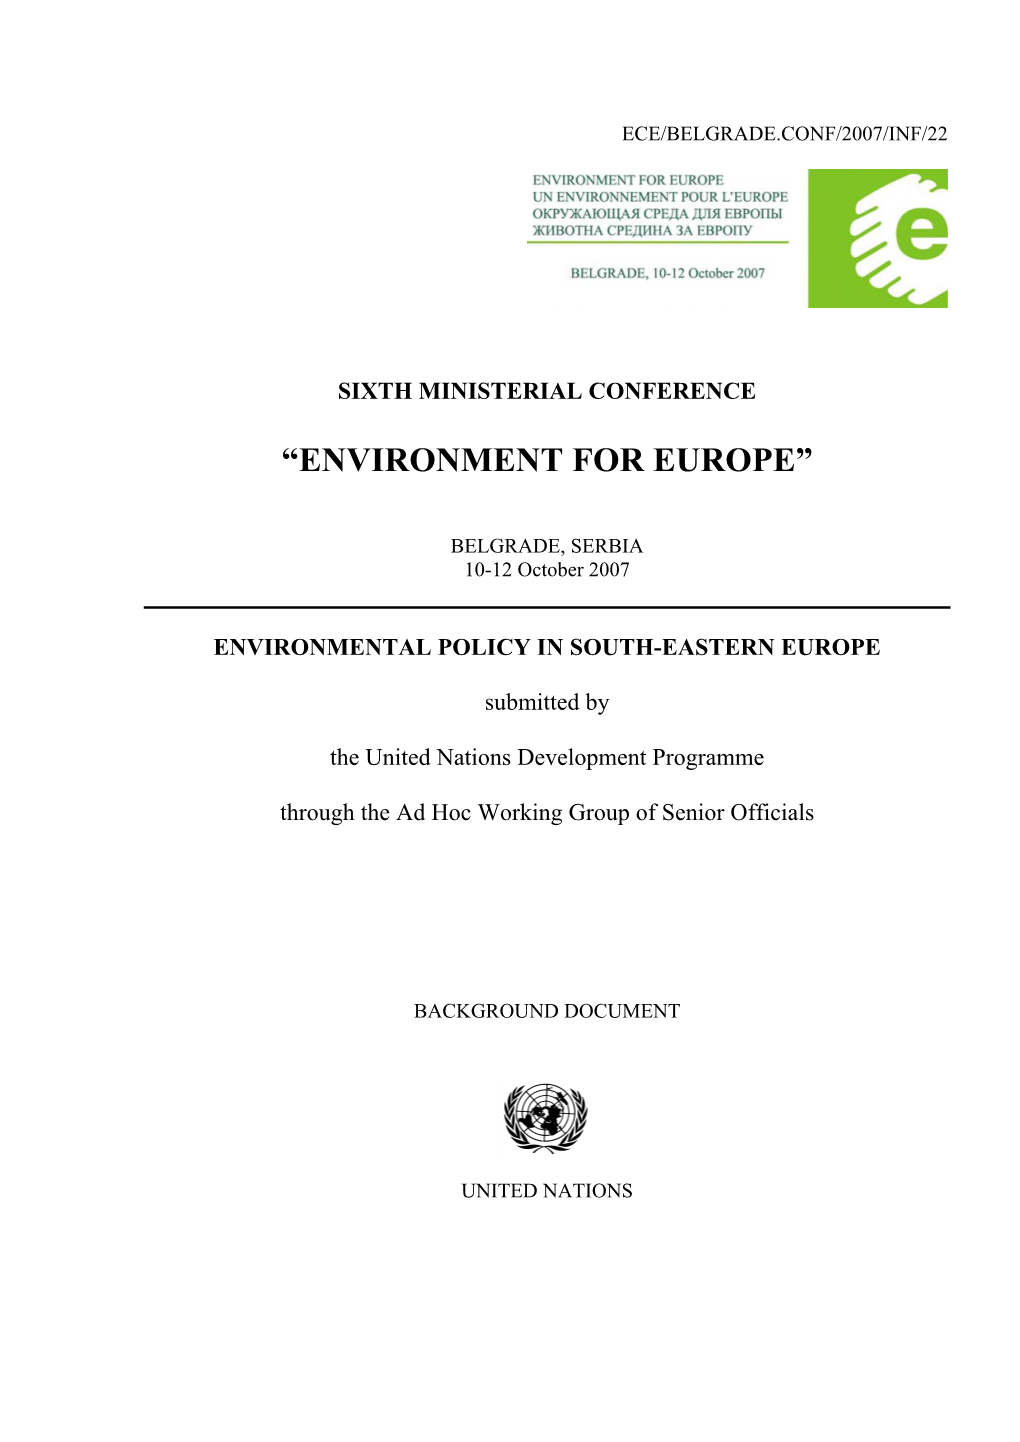 Environmental Policy in South-Eastern Europe